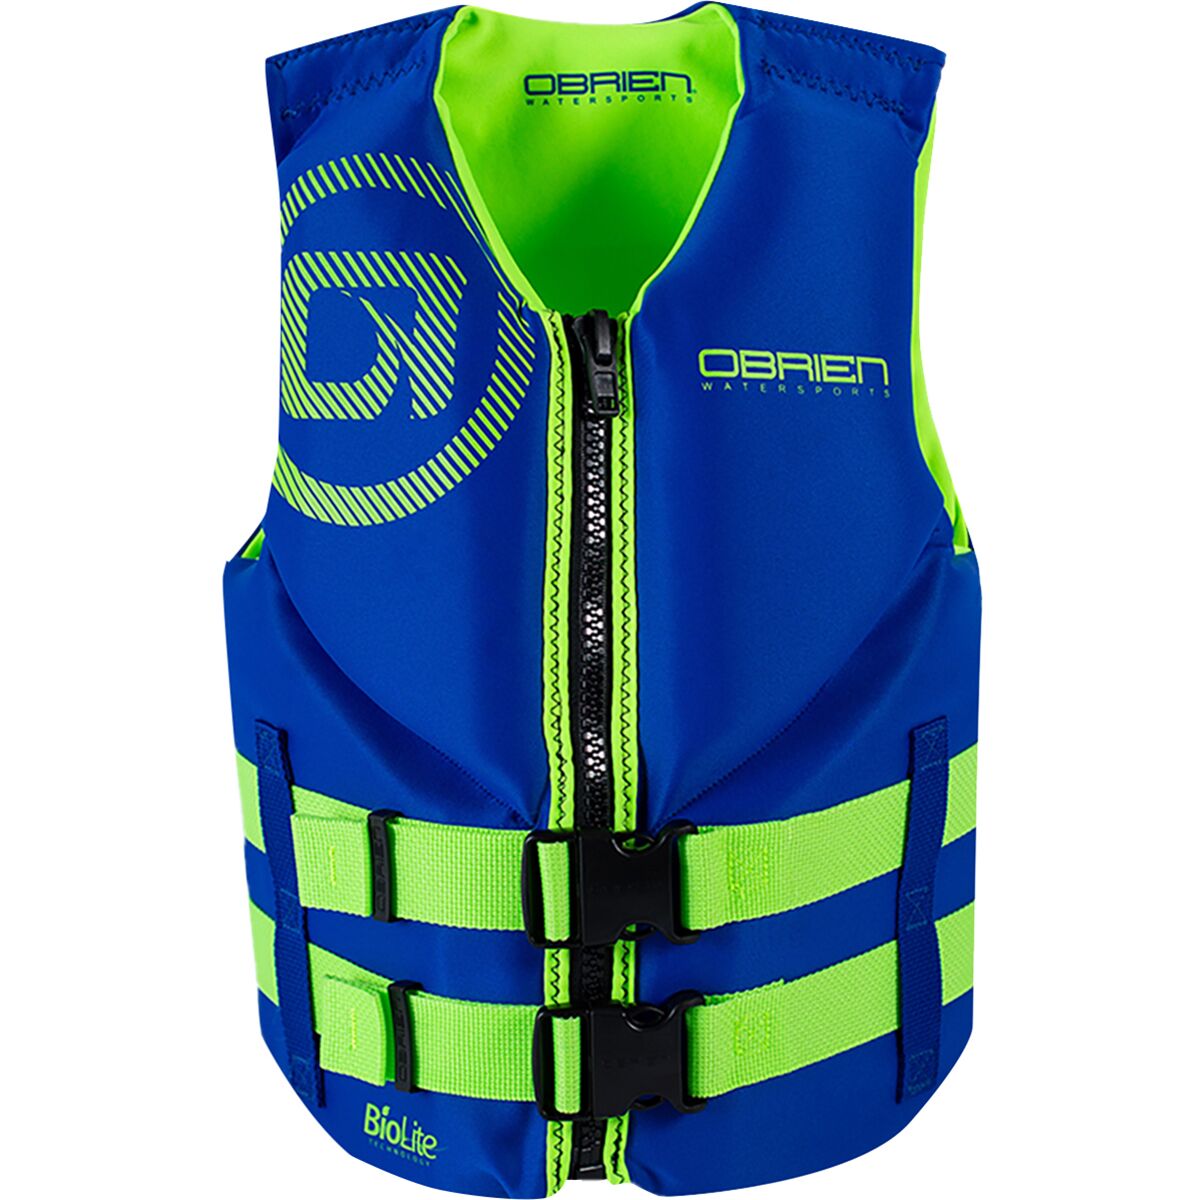 O'Brien Water Sports Junior Personal Flotation Device